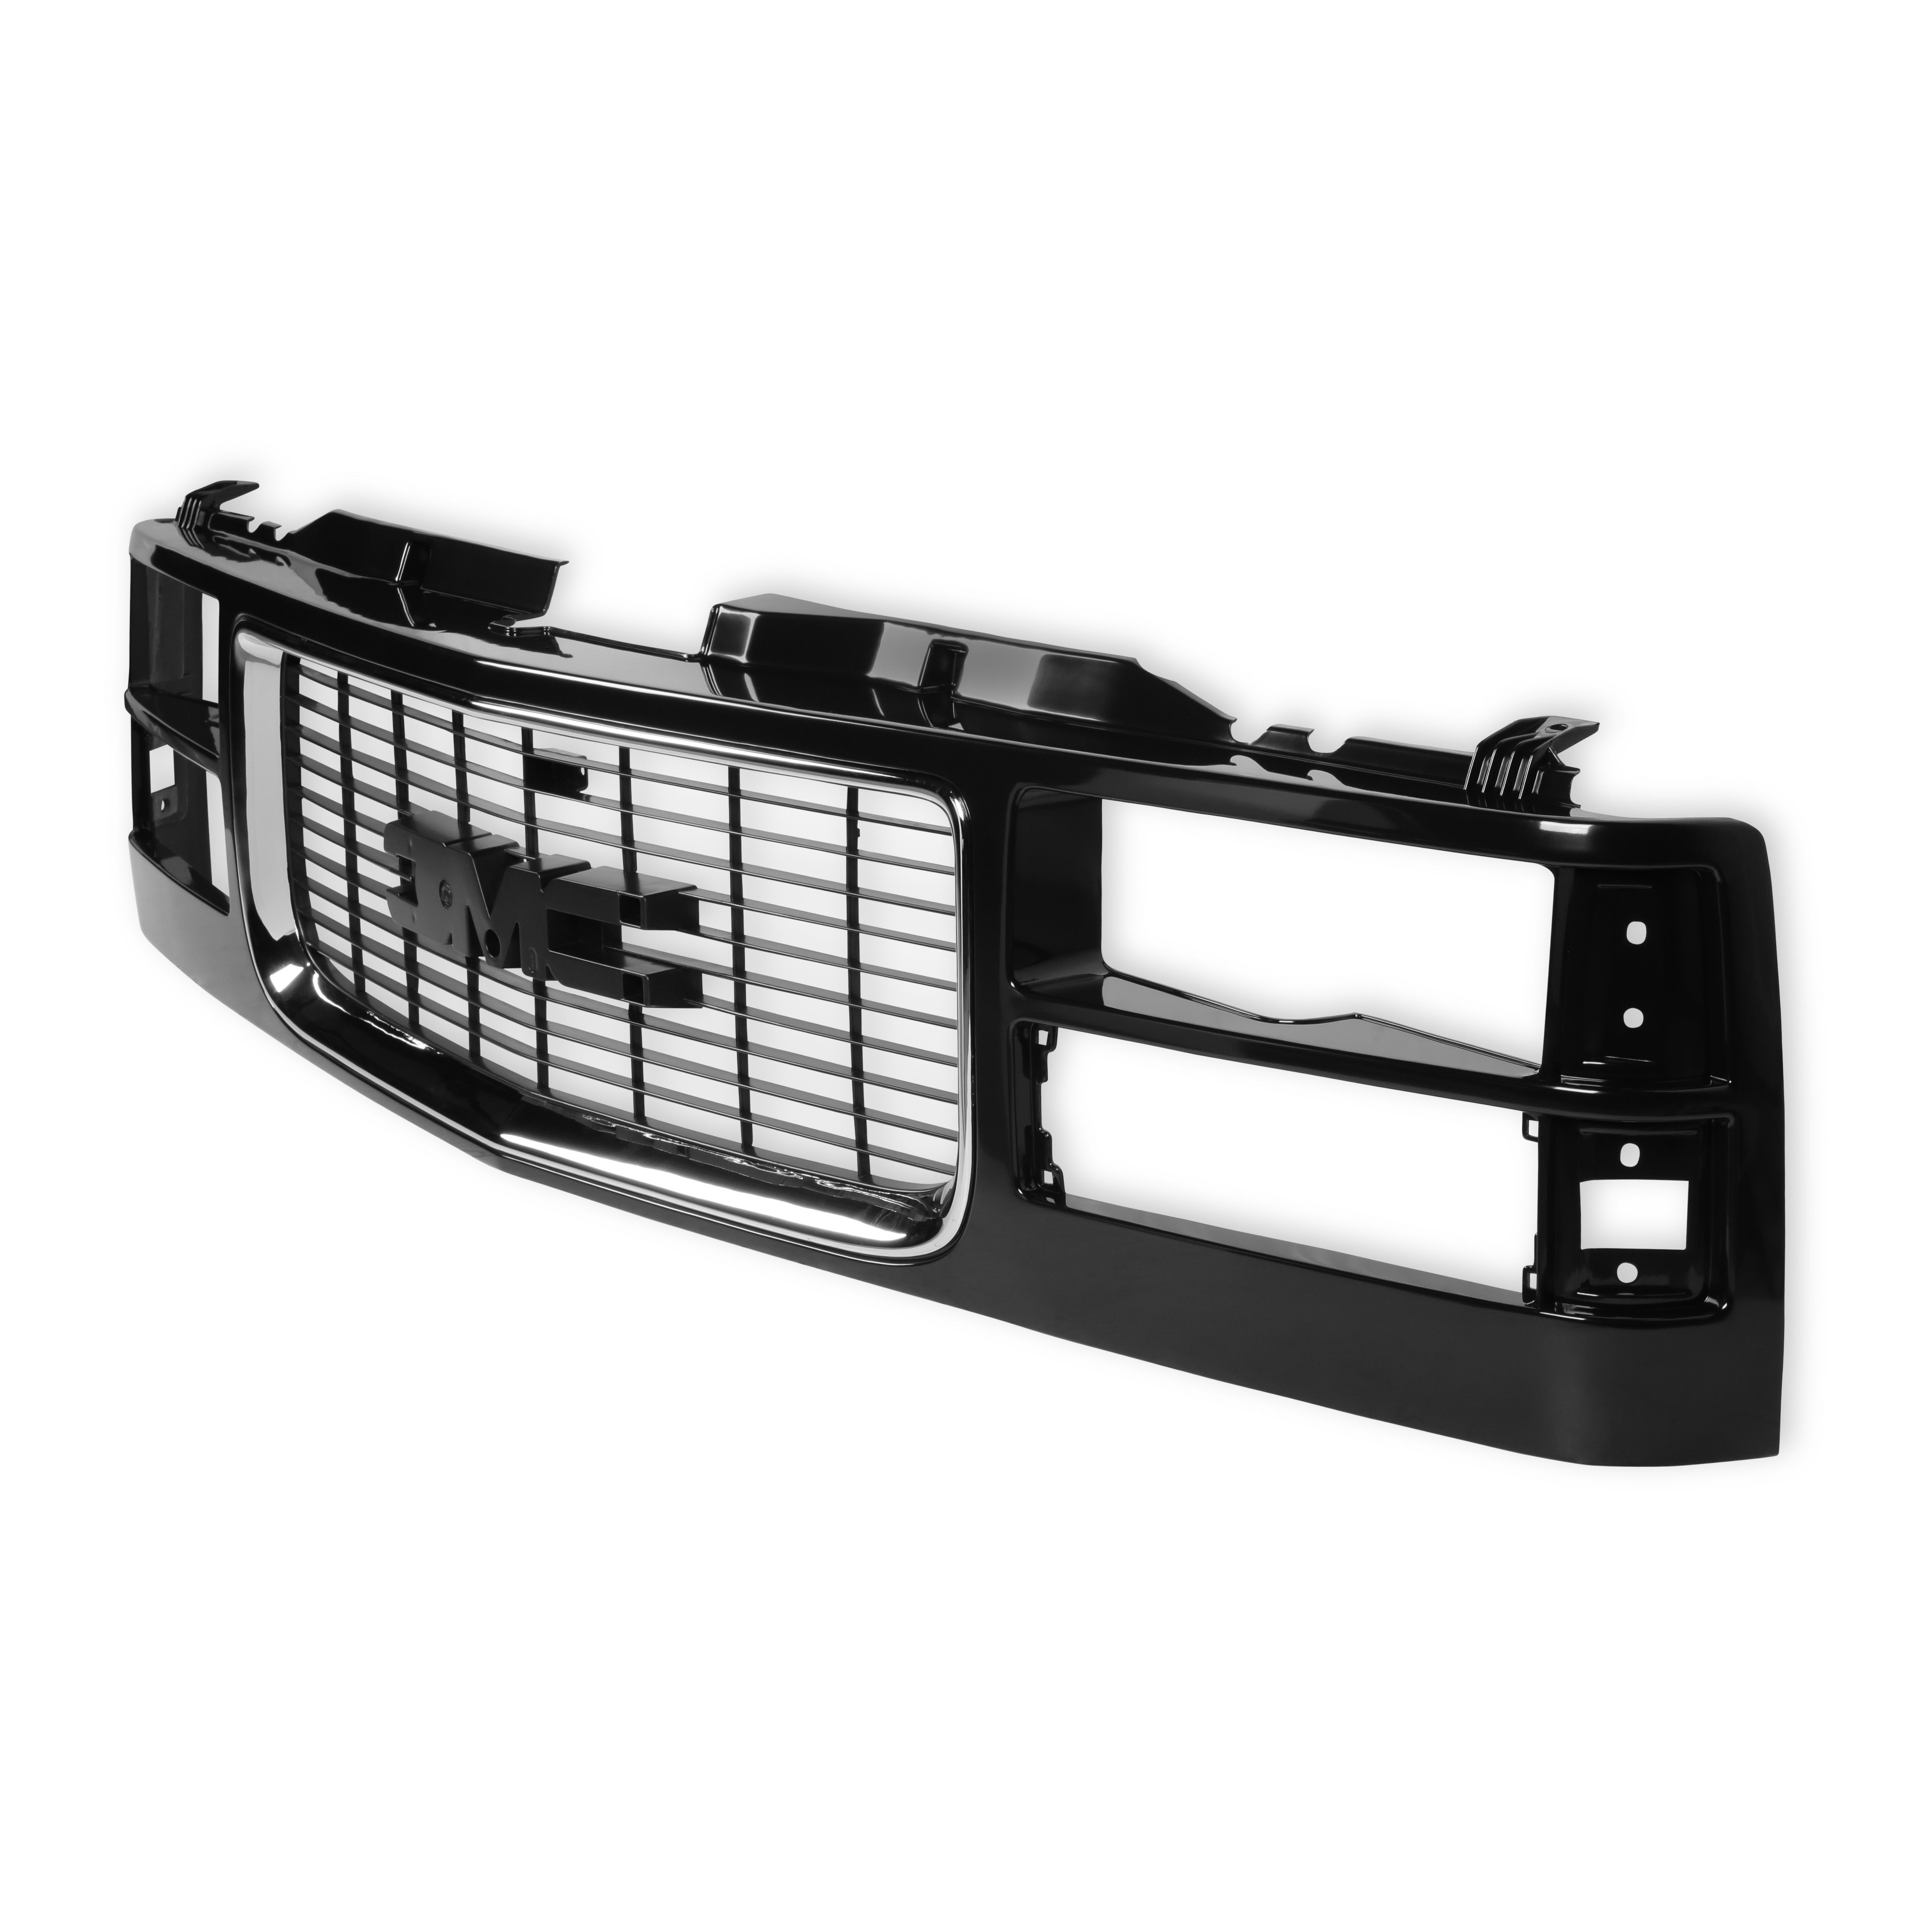 BROTHERS GMT400 GMC Grille - Composite Headlights - Black/Chrome pn 04-476